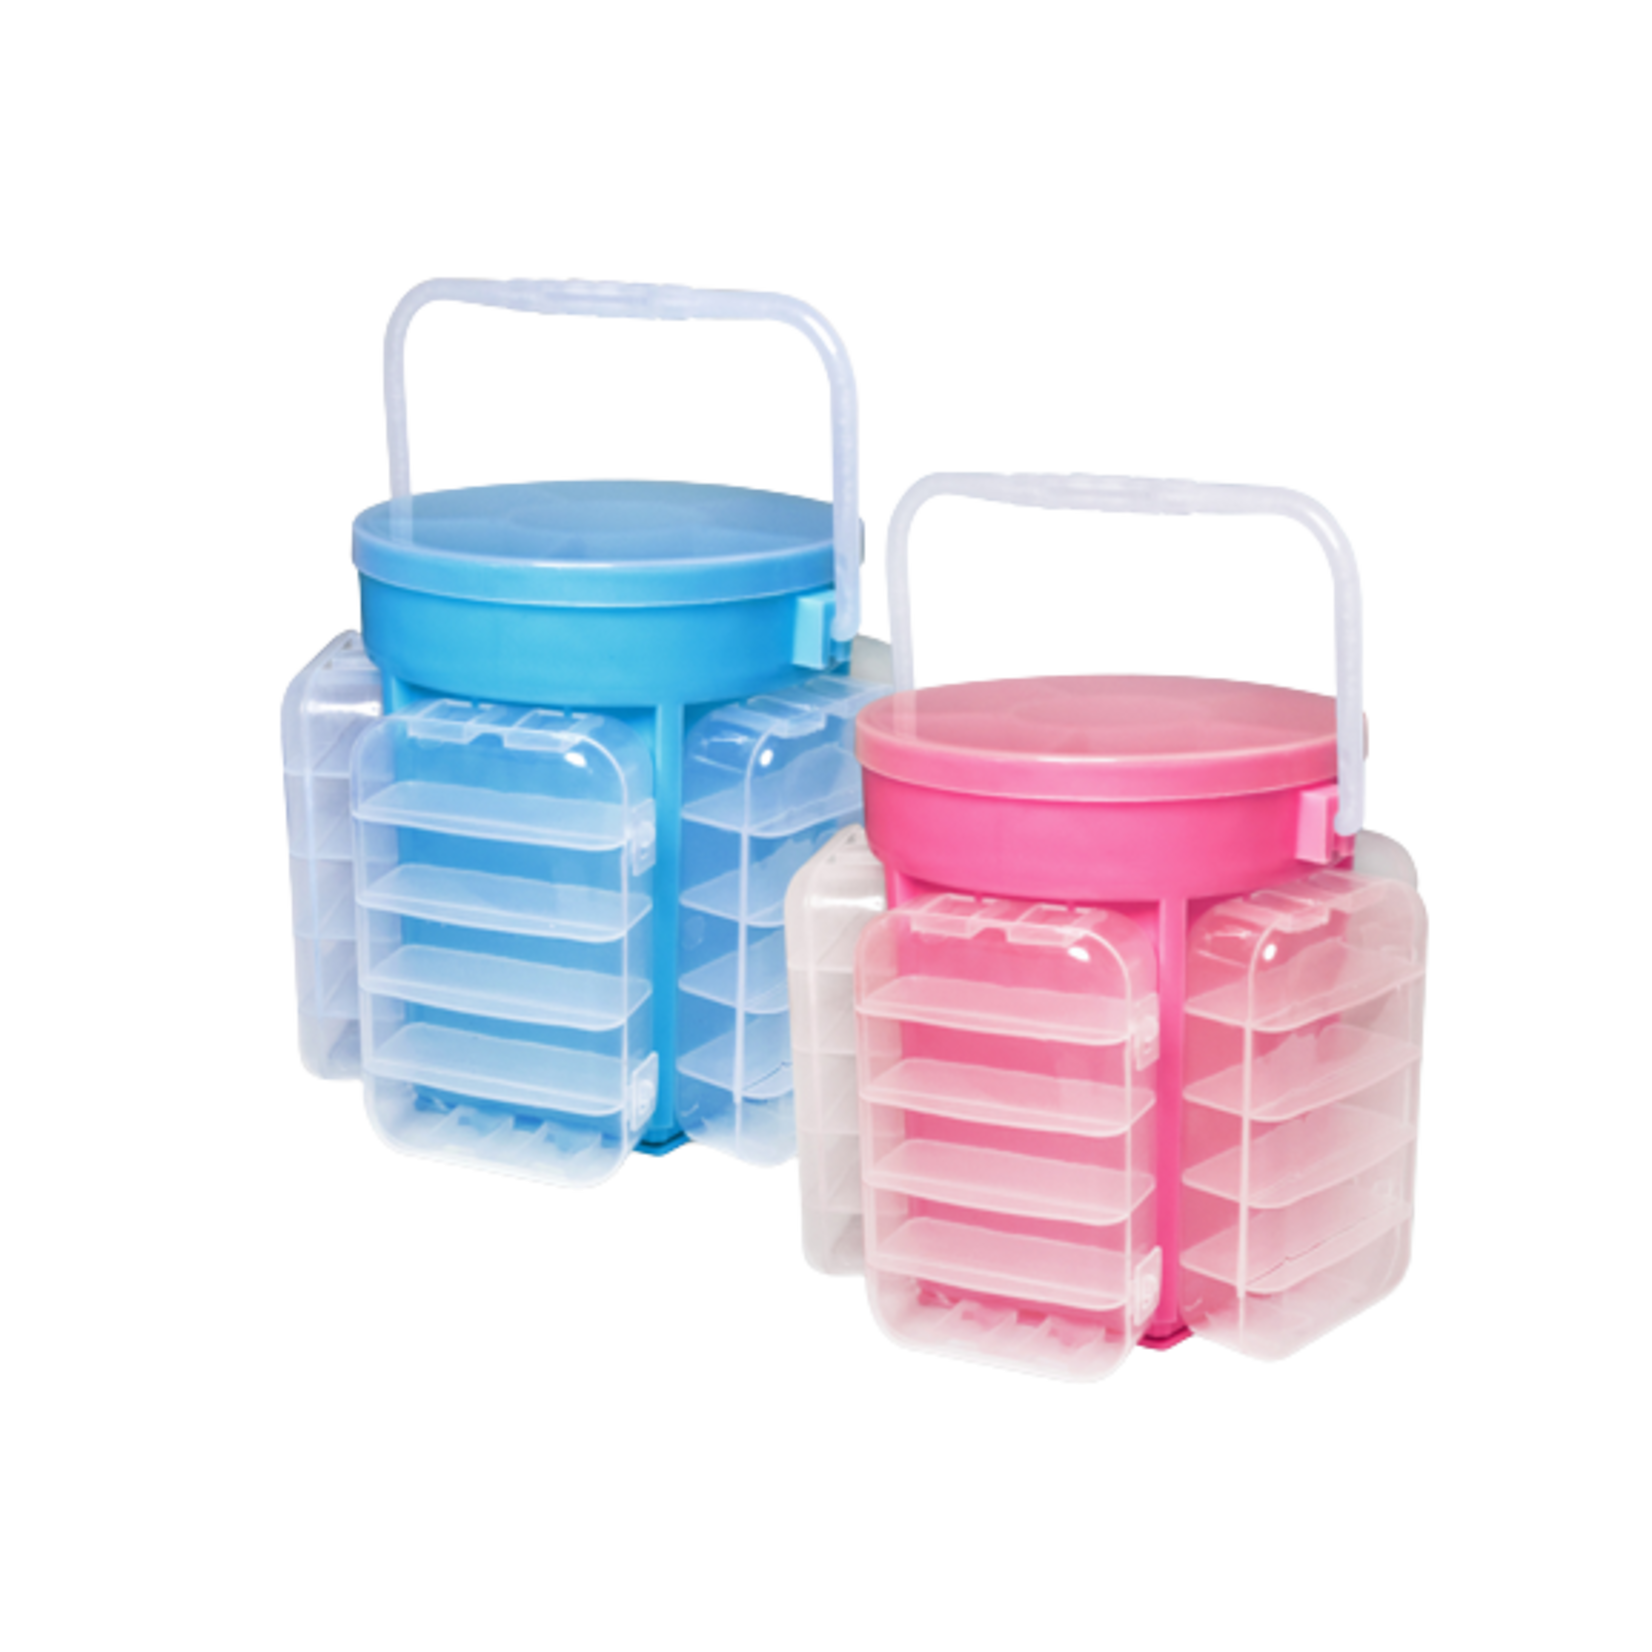 CRAFT STORAGE/ORG BUCKET W/5 SNAP-ON ORG BOXES